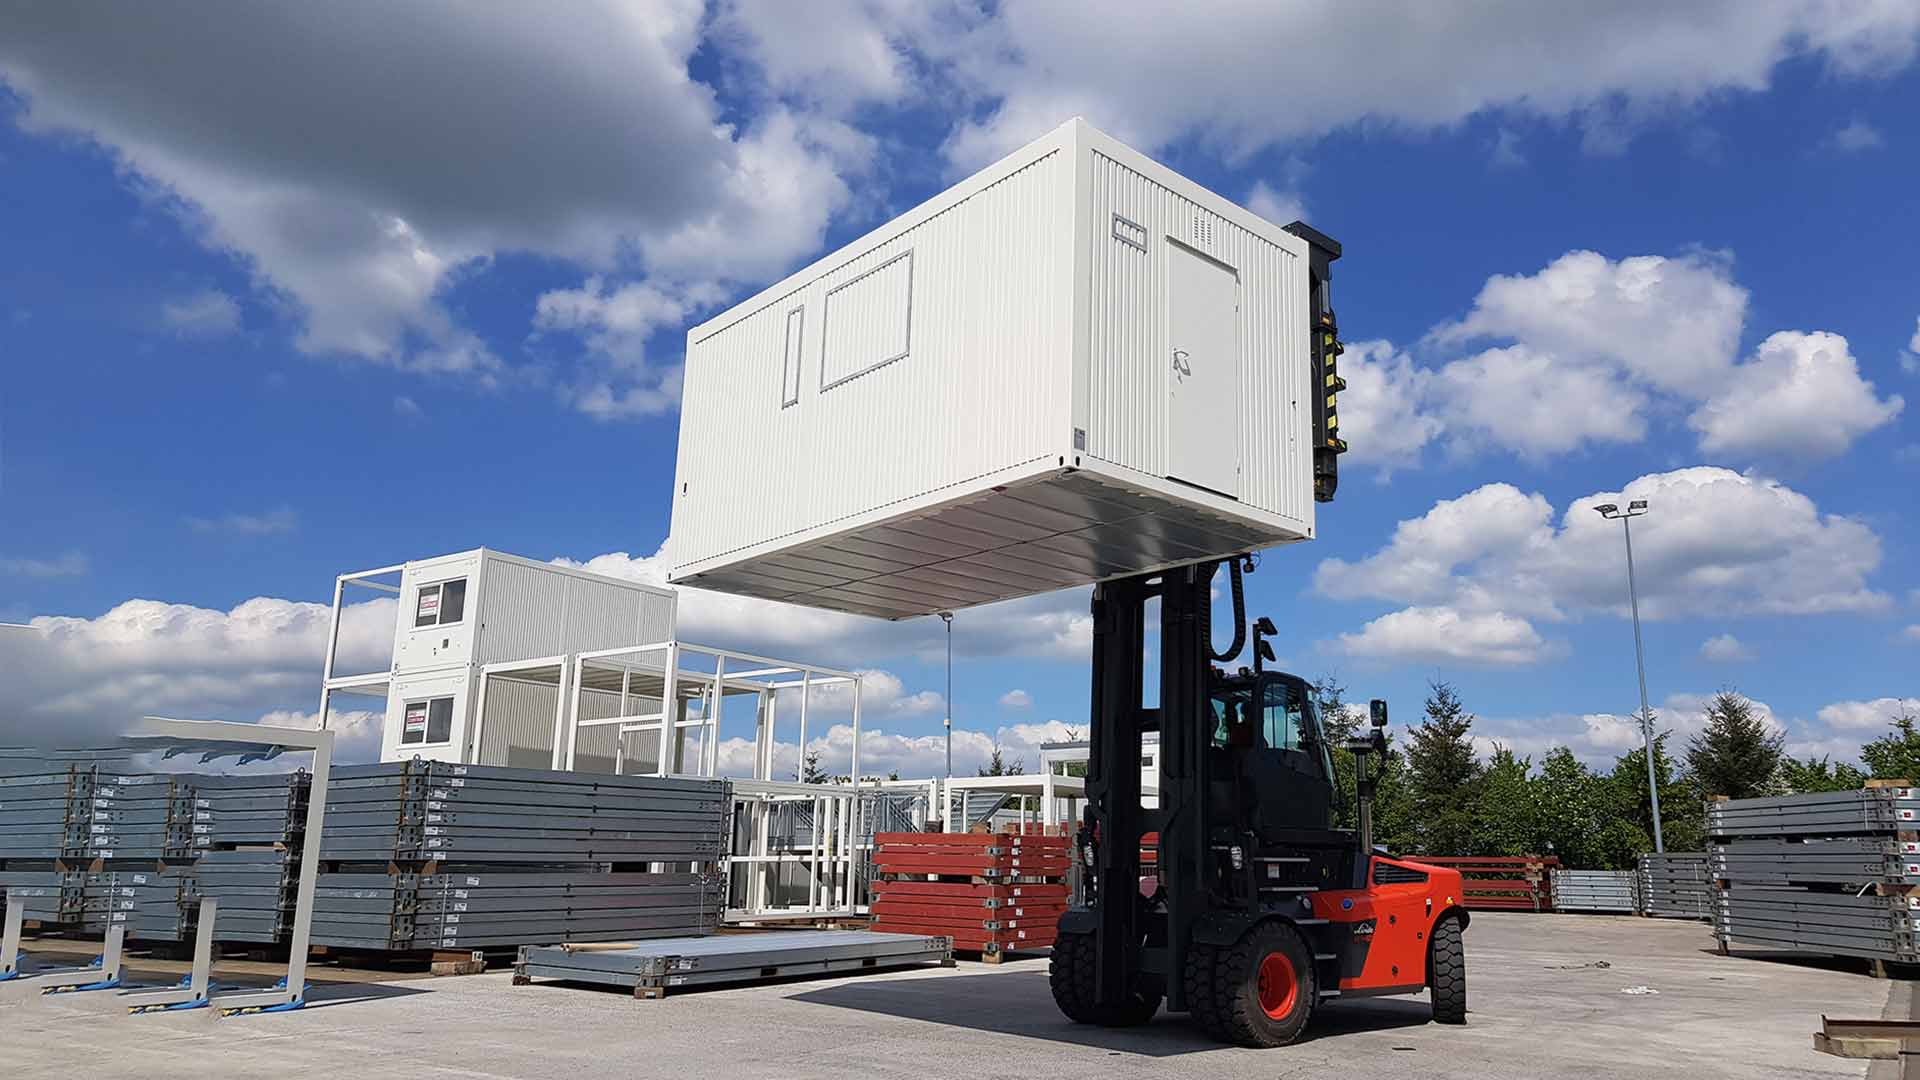 A red forklift truck lifts a white container high up with the help of a wide spreader